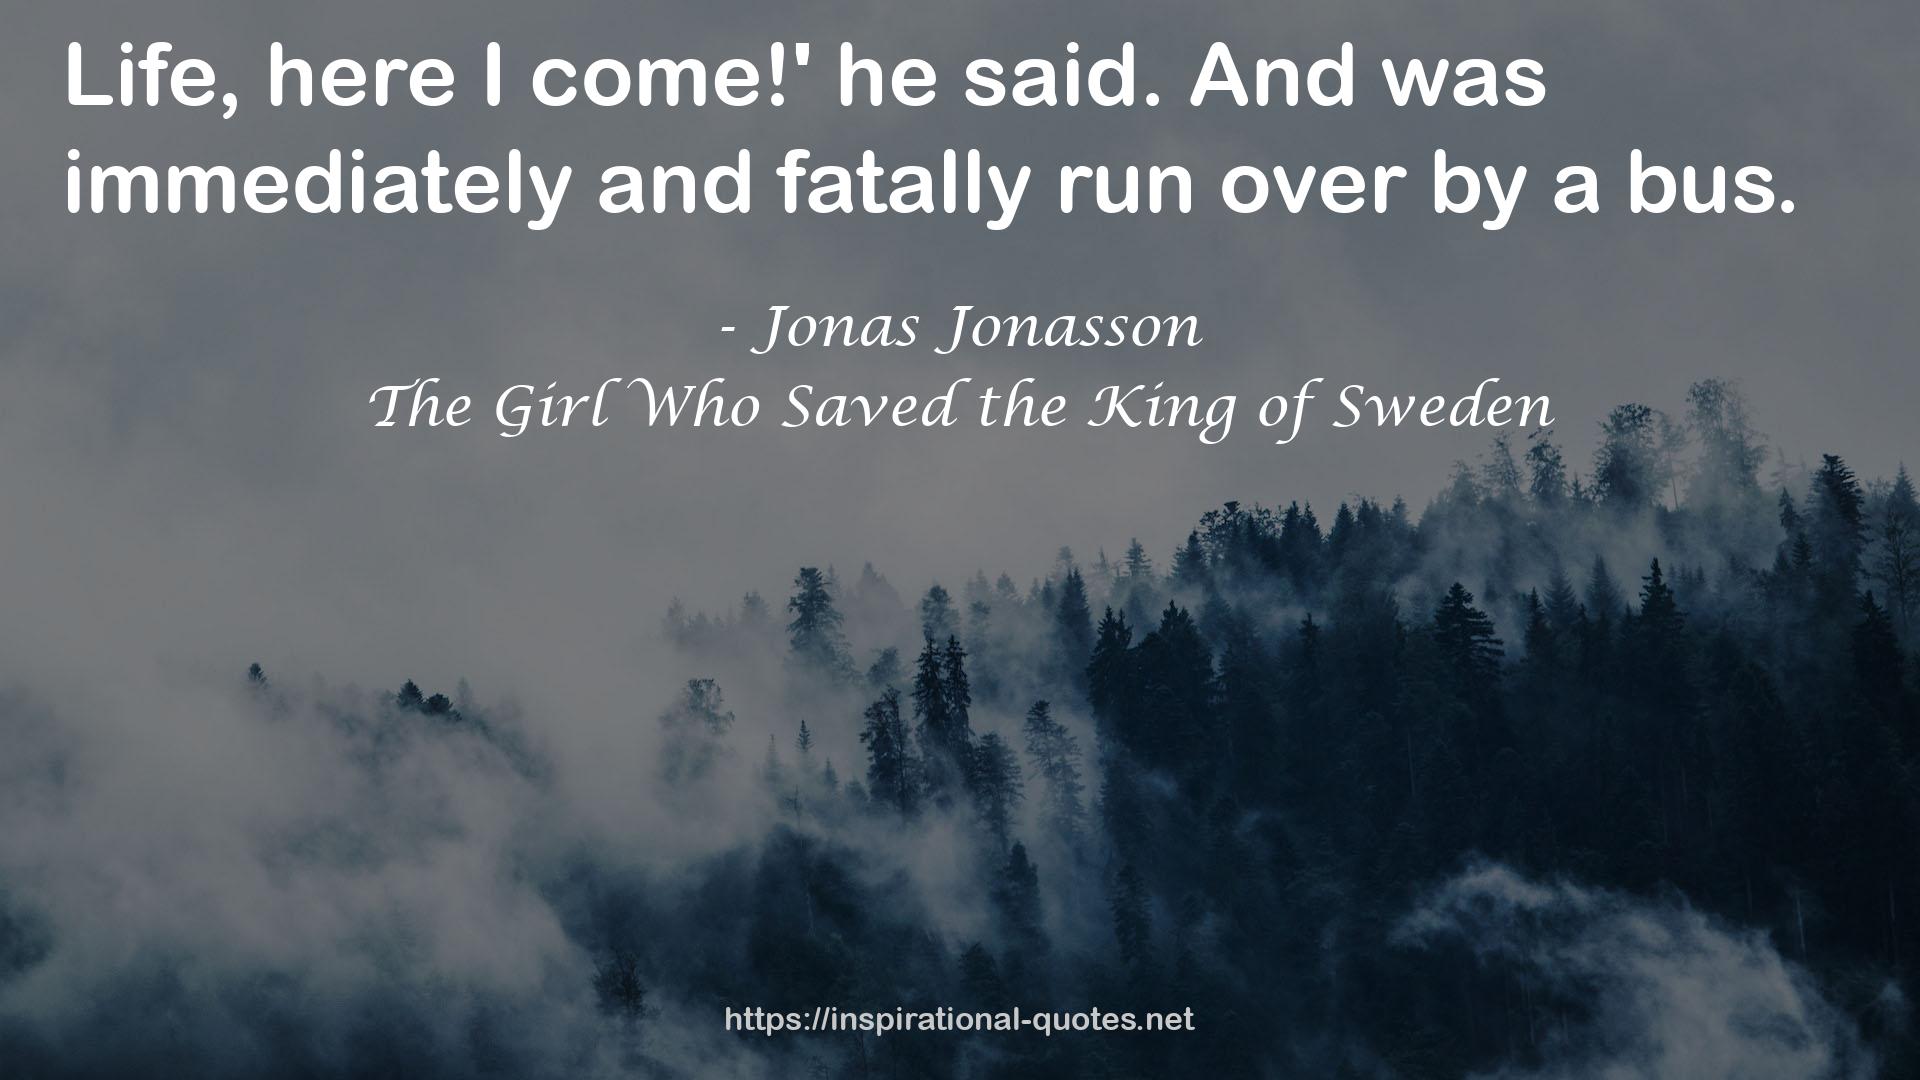 The Girl Who Saved the King of Sweden QUOTES